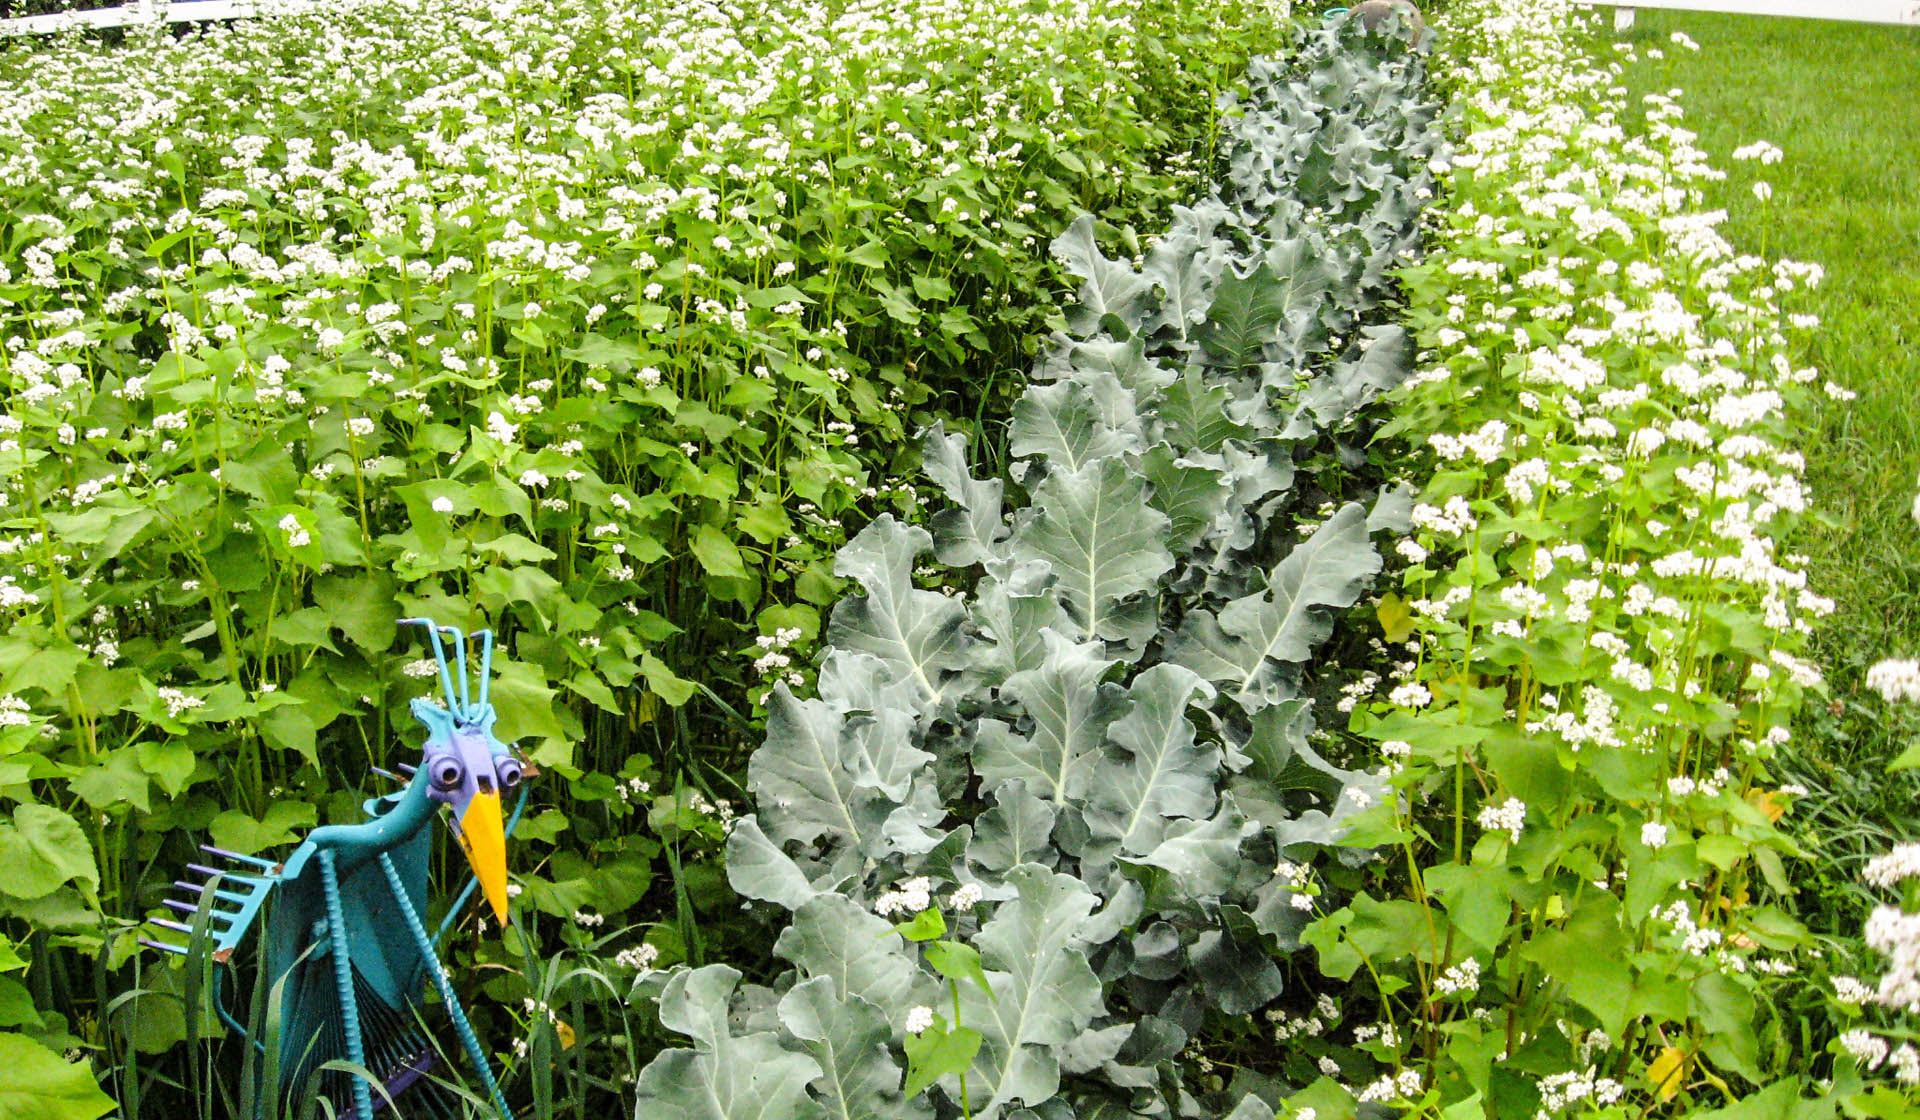 Cover crops being grown in a garden.